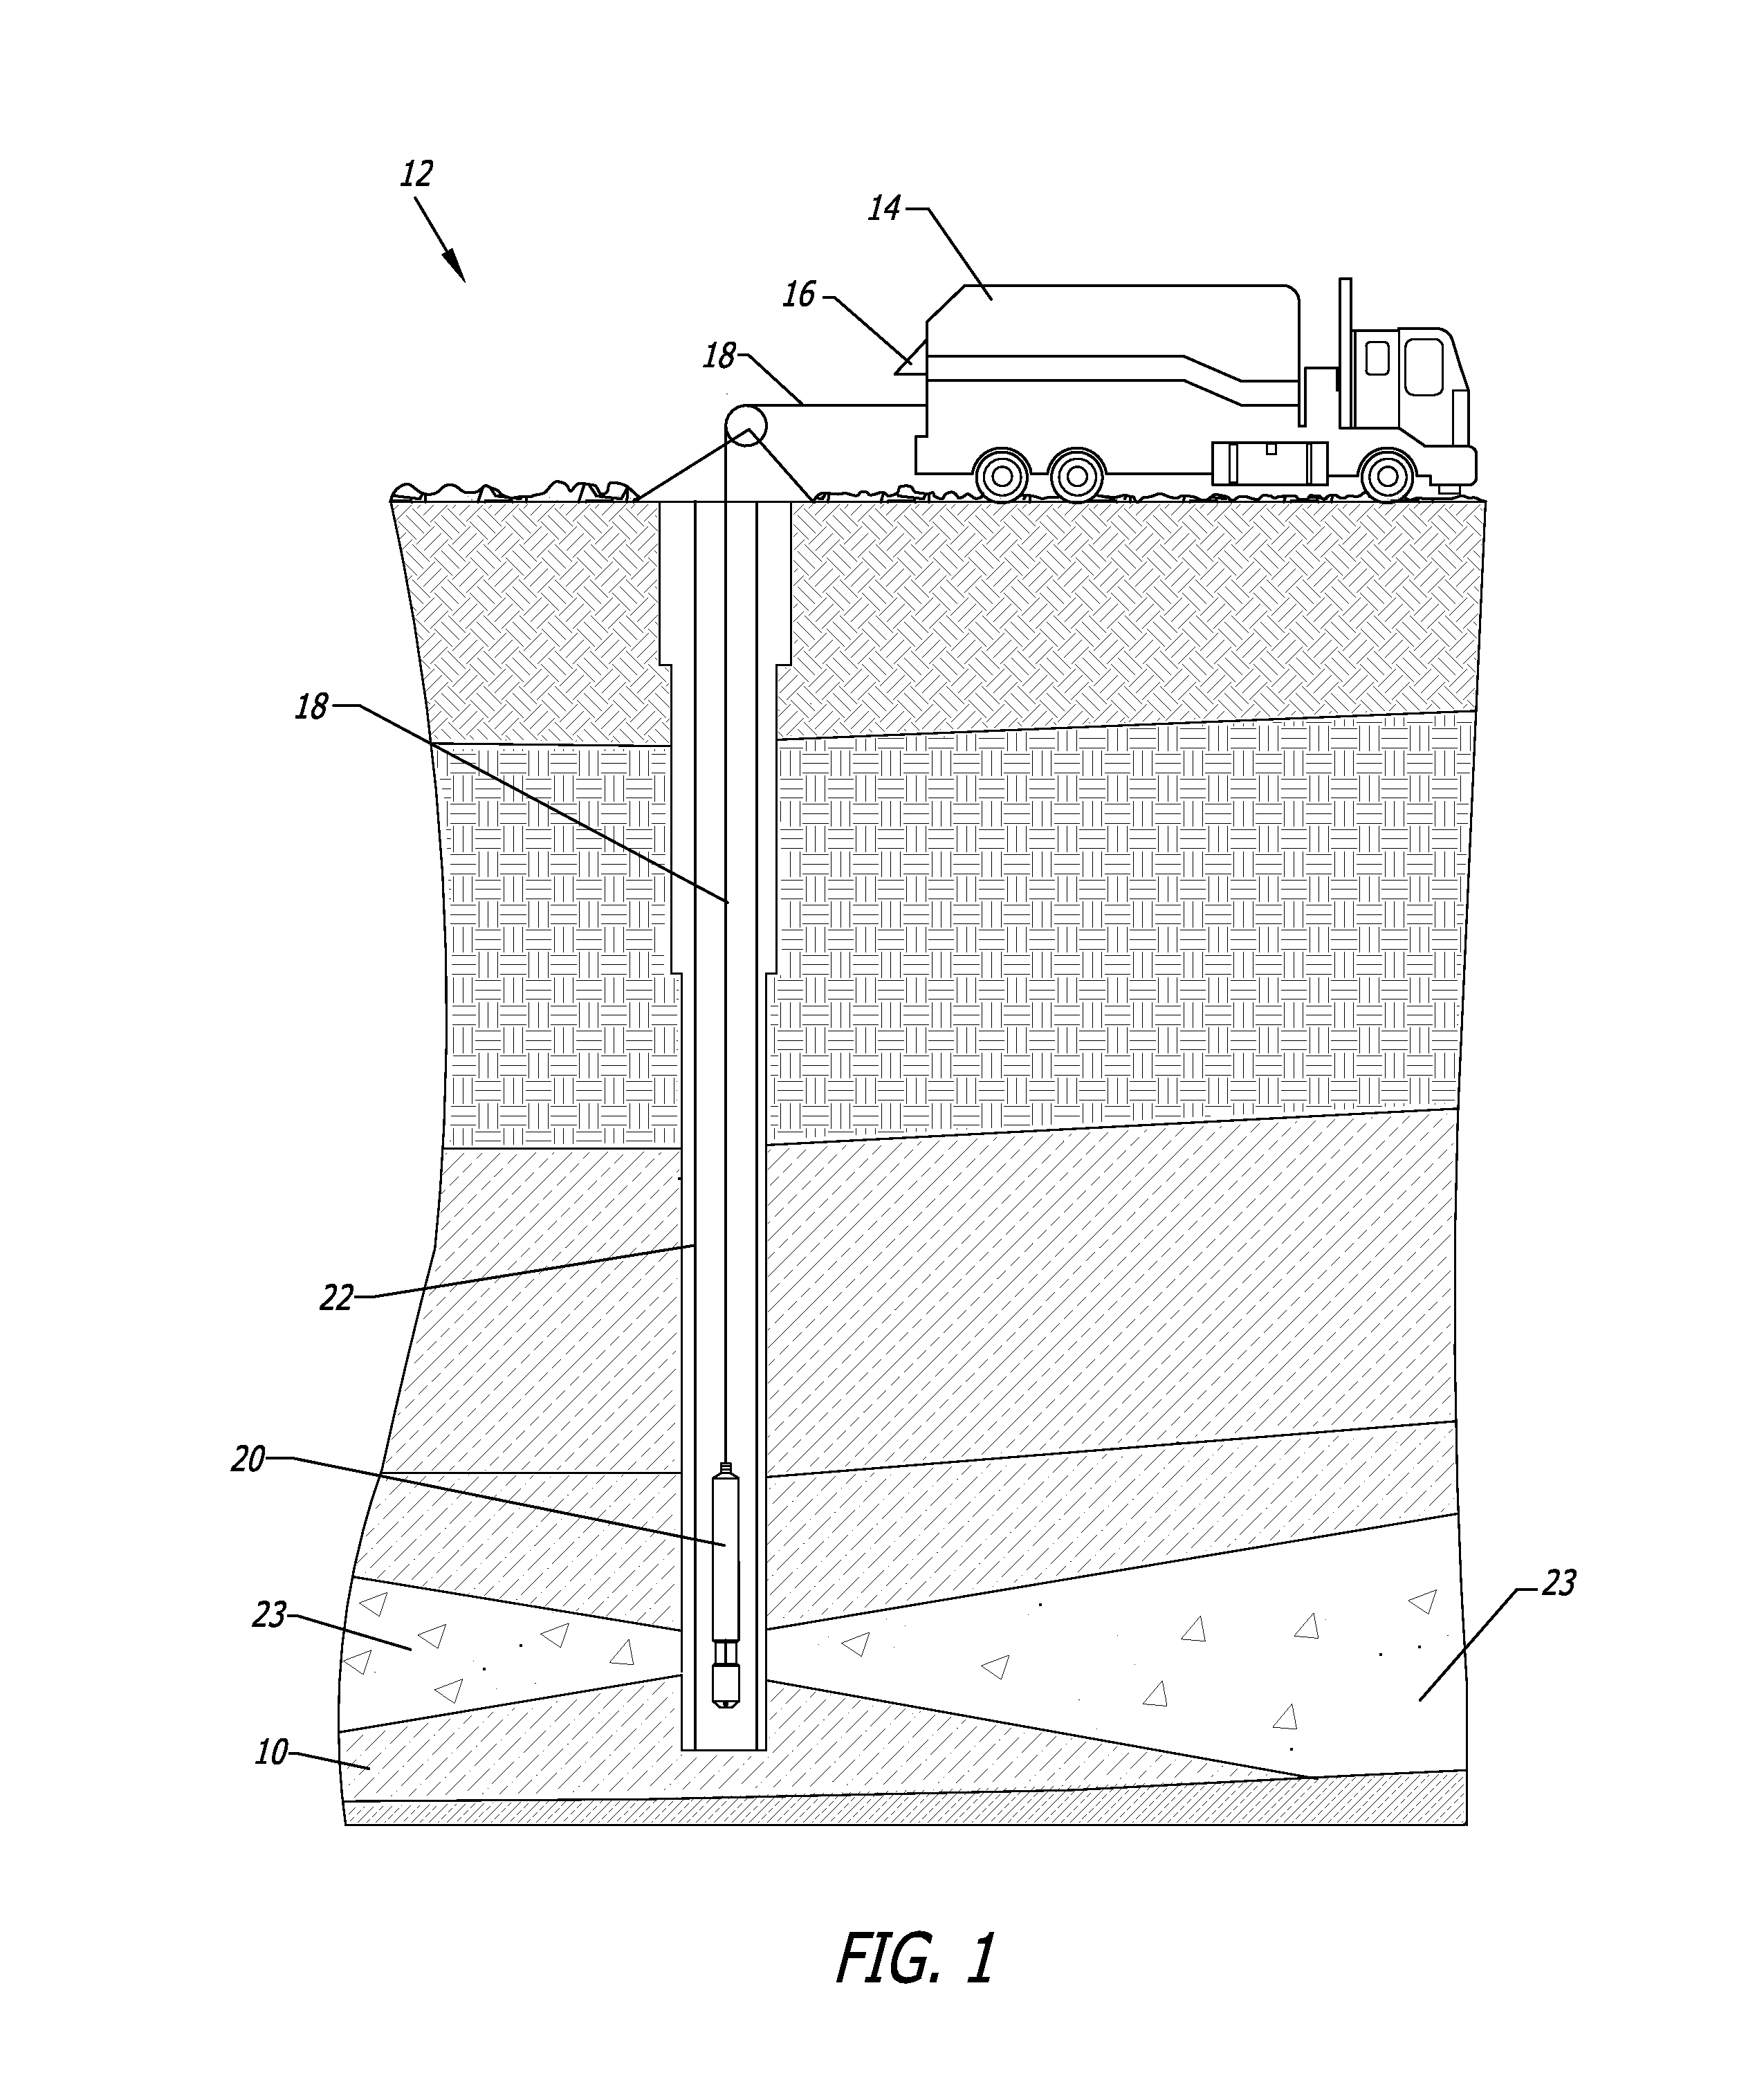 Plasma source for generating nonlinear, wide-band, periodic, directed, elastic oscillations and a system and method for stimulating wells, deposits and boreholes using the plasma source